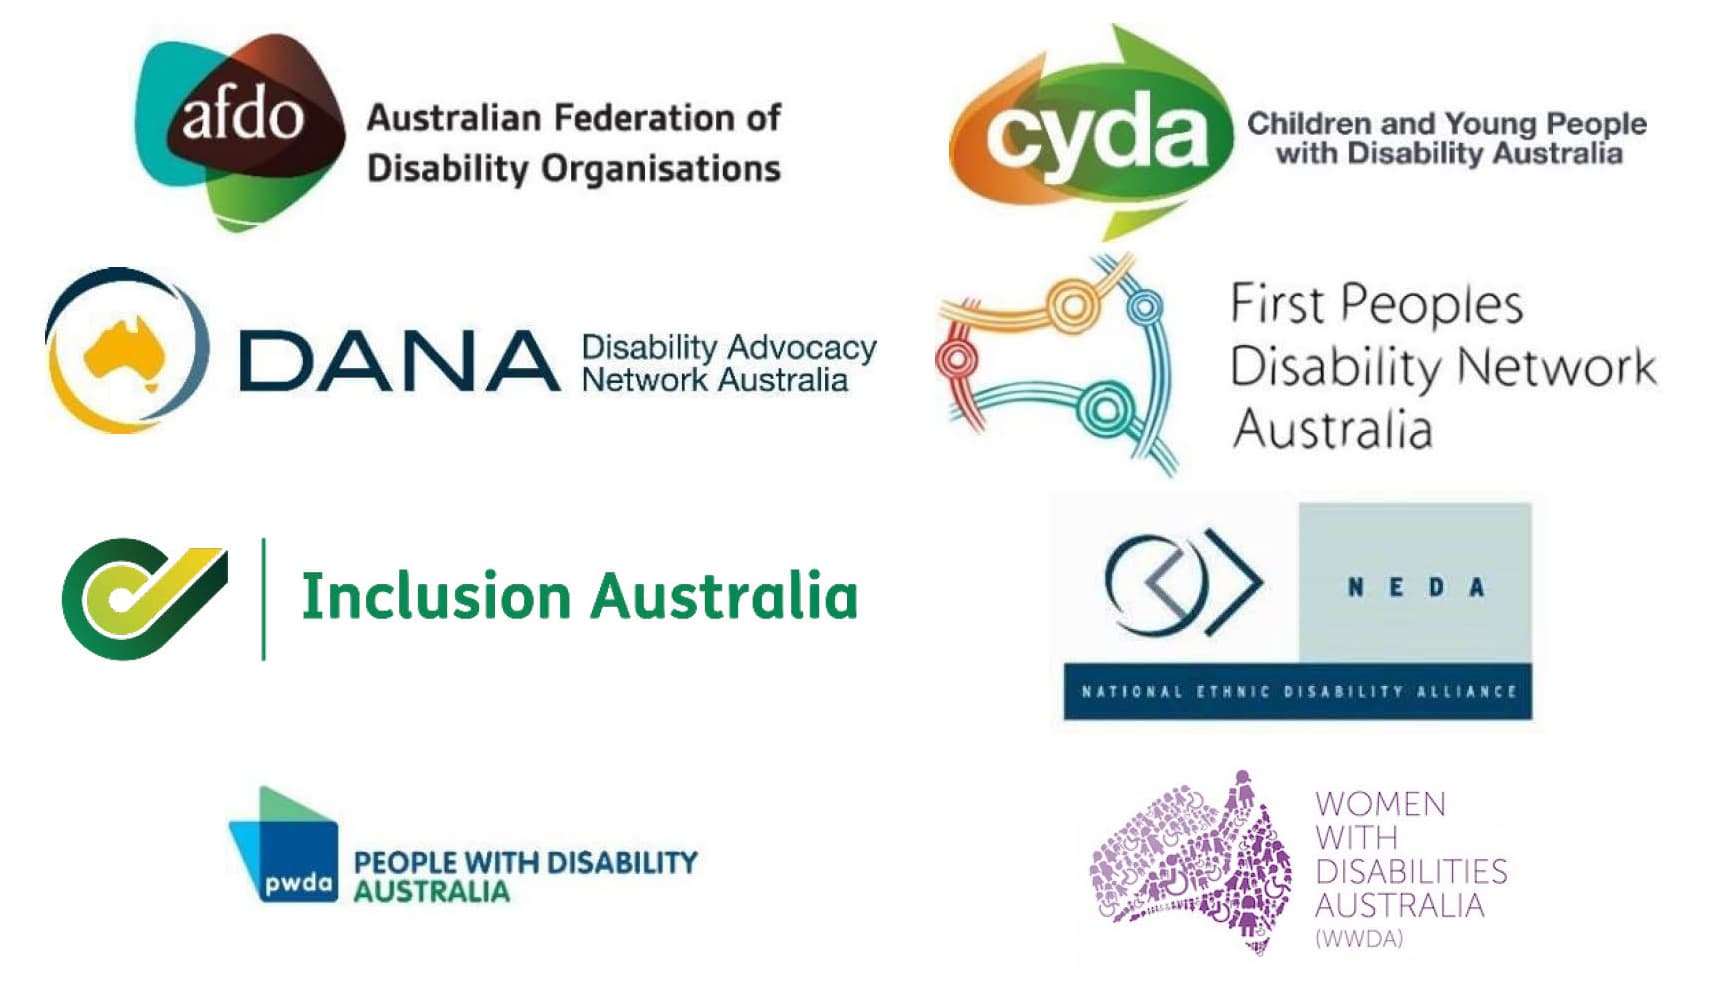 Logos for Australian Federation of Disability Organisations (AFDO), Children and Young People with Disability Australia (CYDA), Disability Advocacy Network Australia (DANA), First Peoples Disability Network Australia, Inclusion Australia, National Ethnic Disability Alliance (NEDA), People with Disability Australia (PWDA), Women with Disabilities Australia (WWDA).